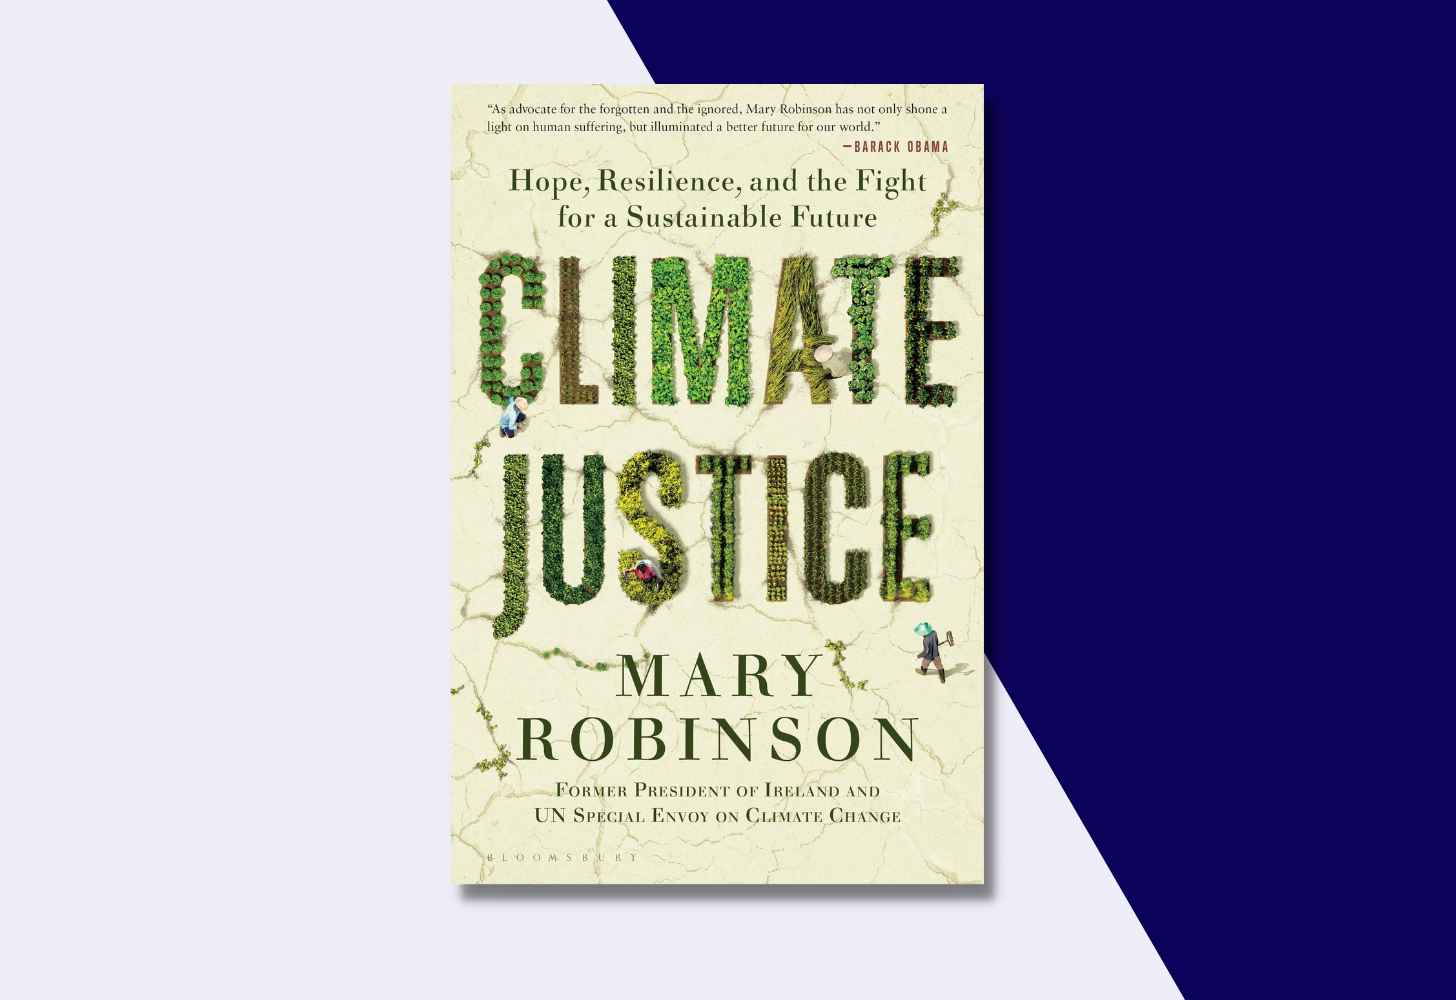 The Cover Of “Climate Justice: Hope, Resilience, and the Fight for a Sustainable Future” by Mary Robinson